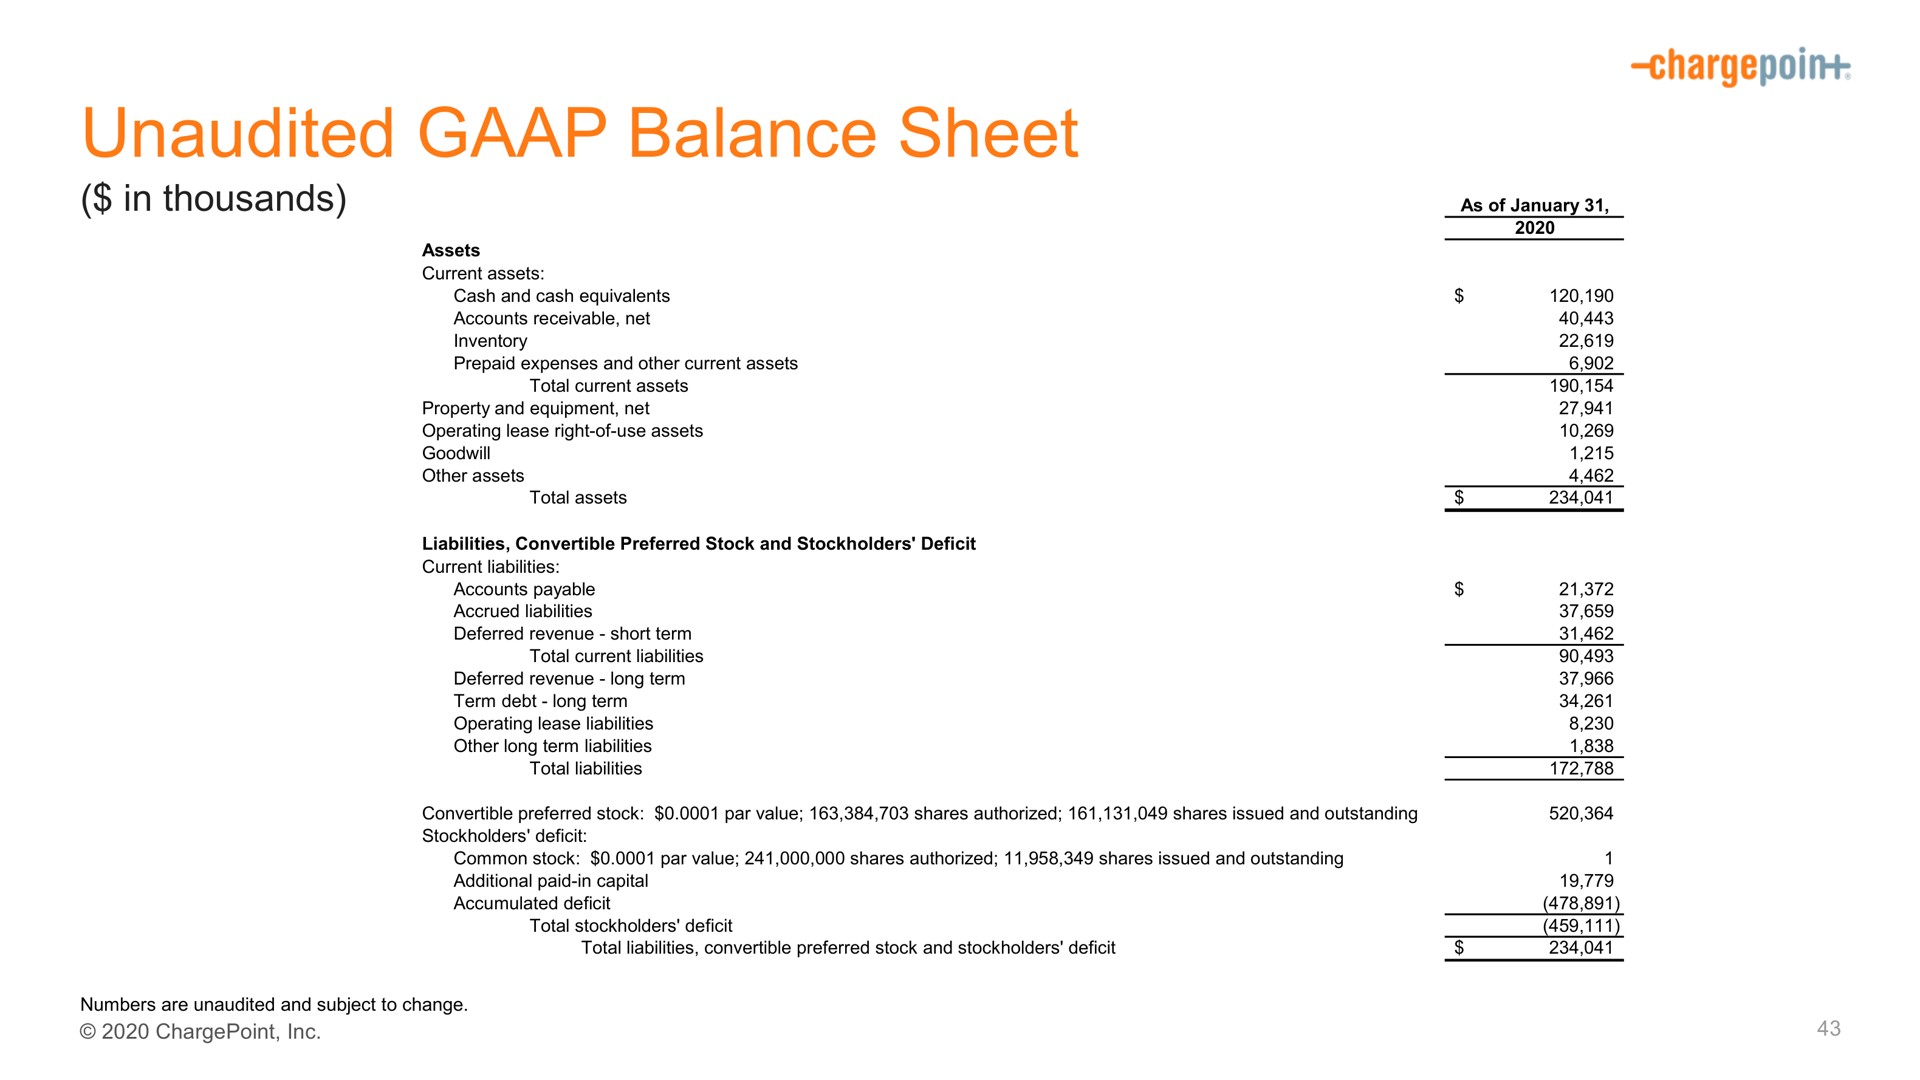 unaudited balance sheet | ChargePoint